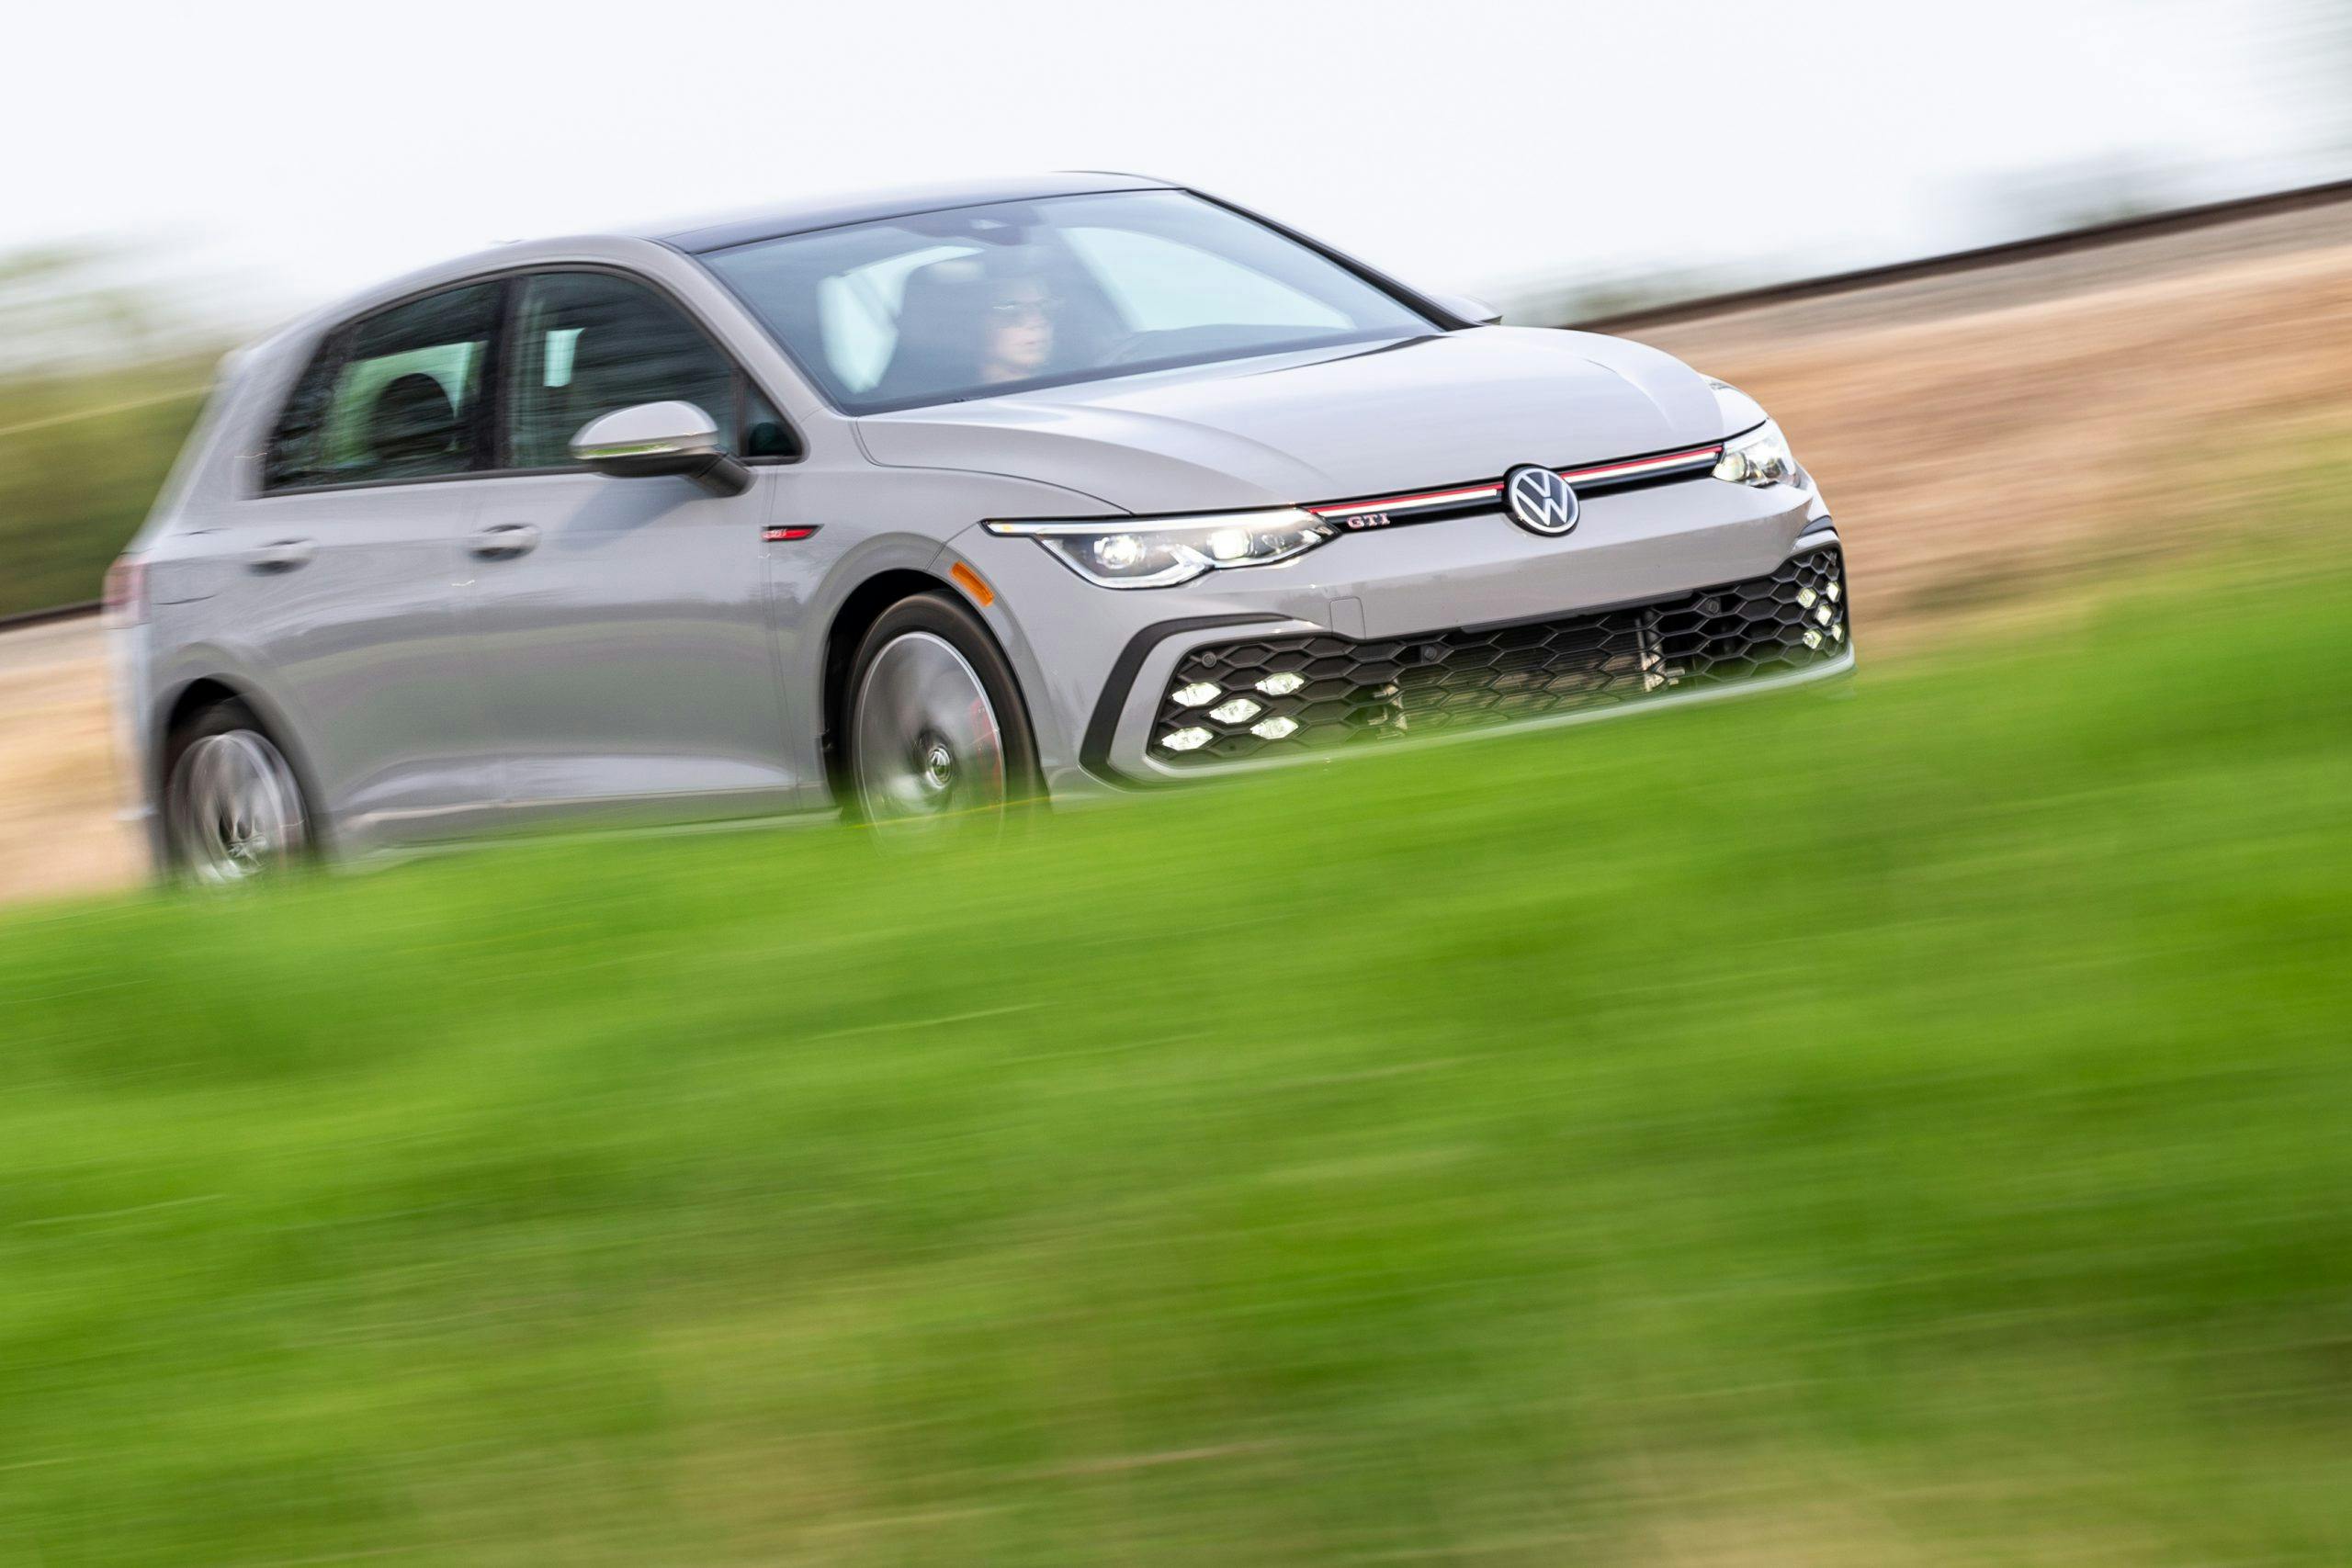 New Volkswagen Golf GTI Coming With Interesting Changes